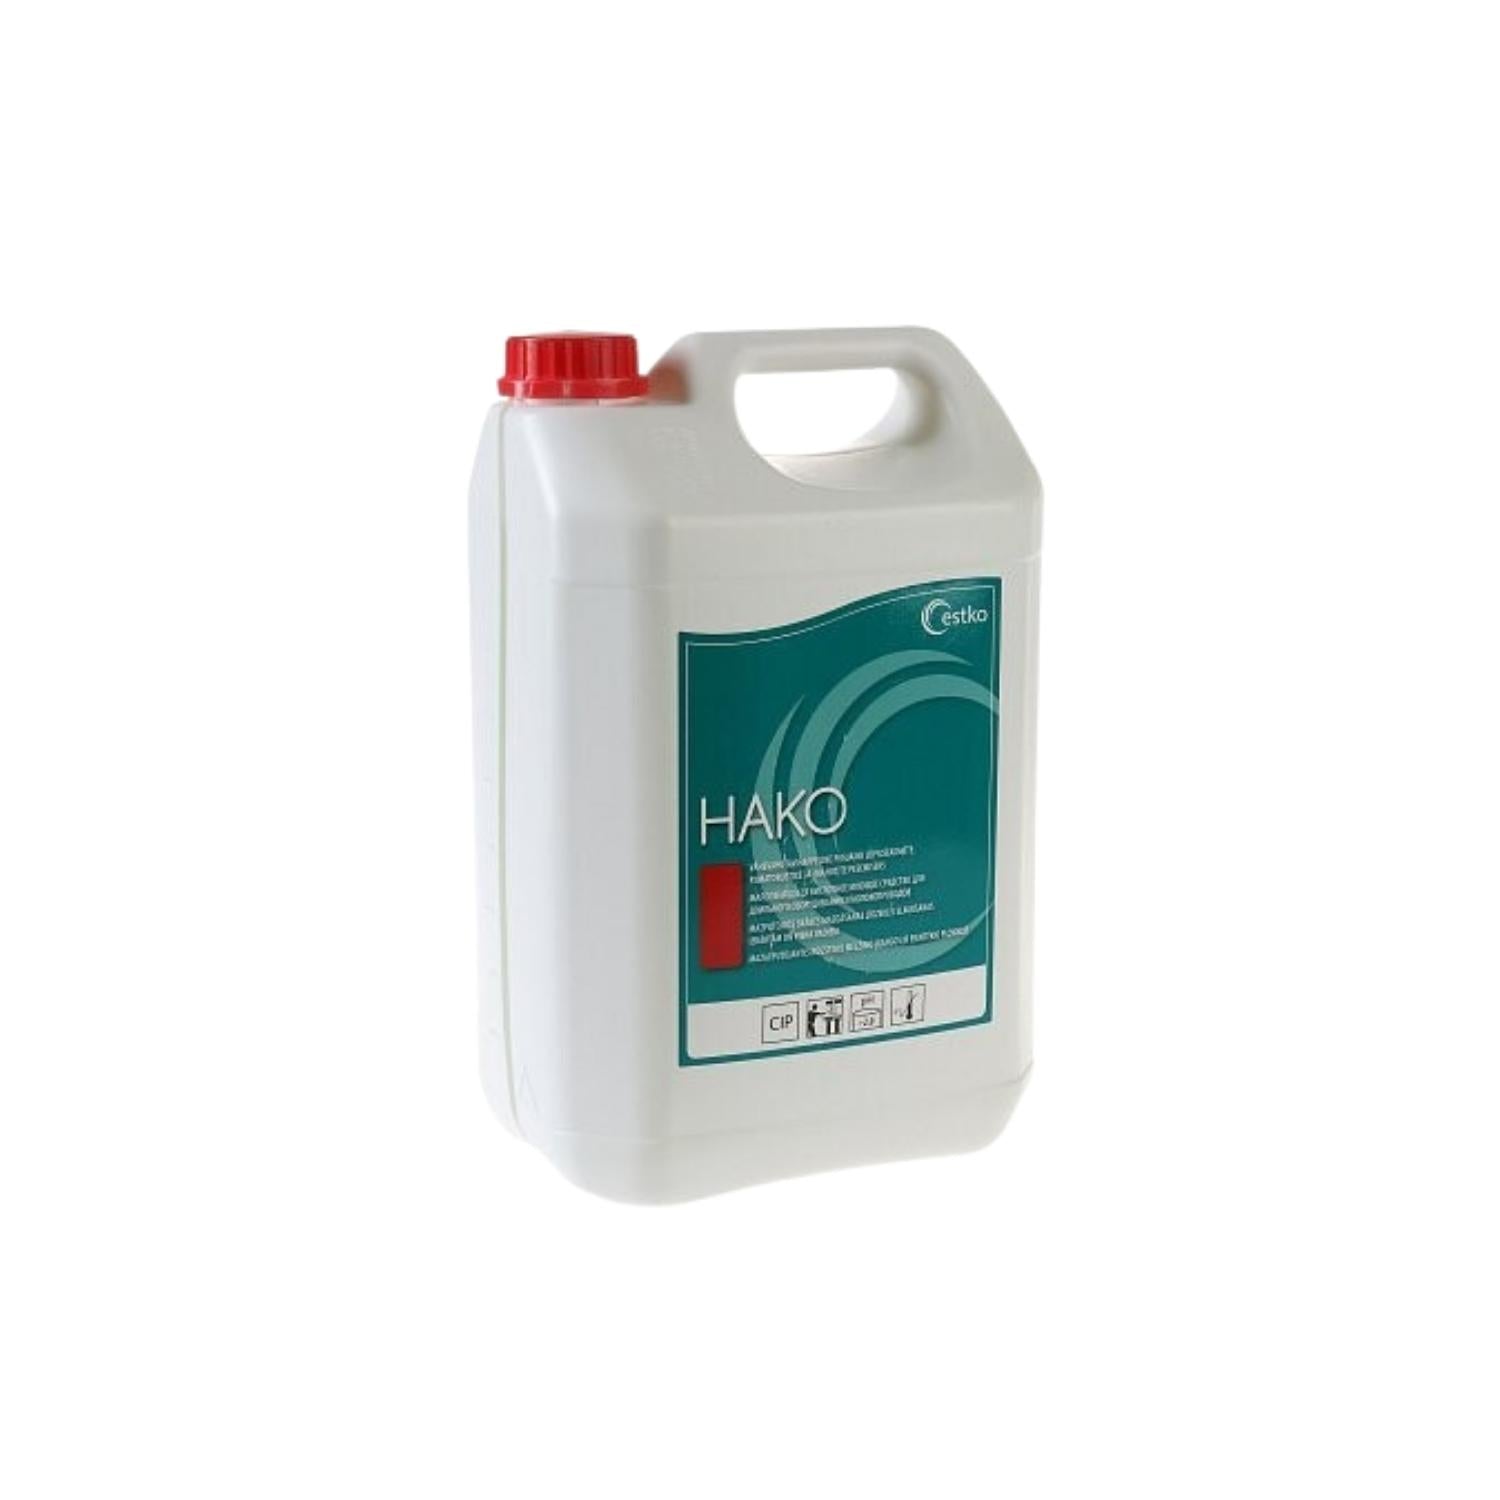 HAKO 5L Acid detergent for milking devices and milk ducts